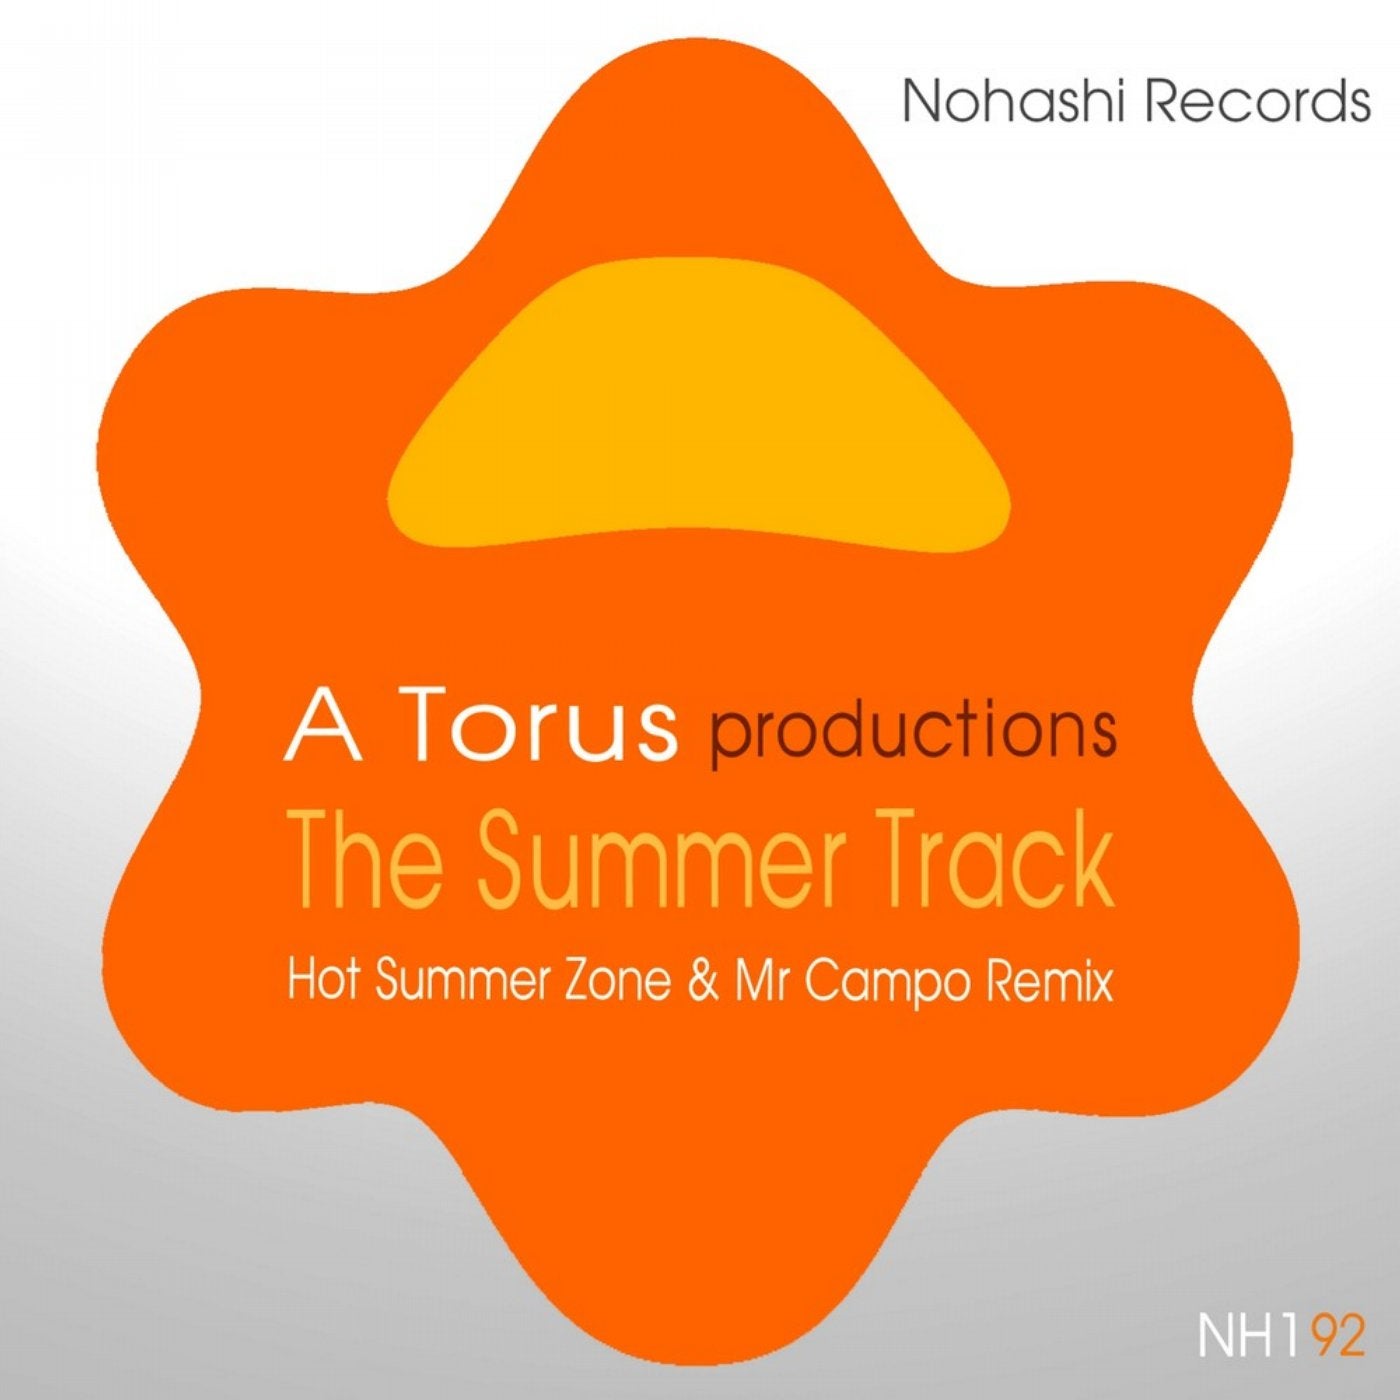 The Summer Track (Hot Summer Zone & Mr Campo Remix)